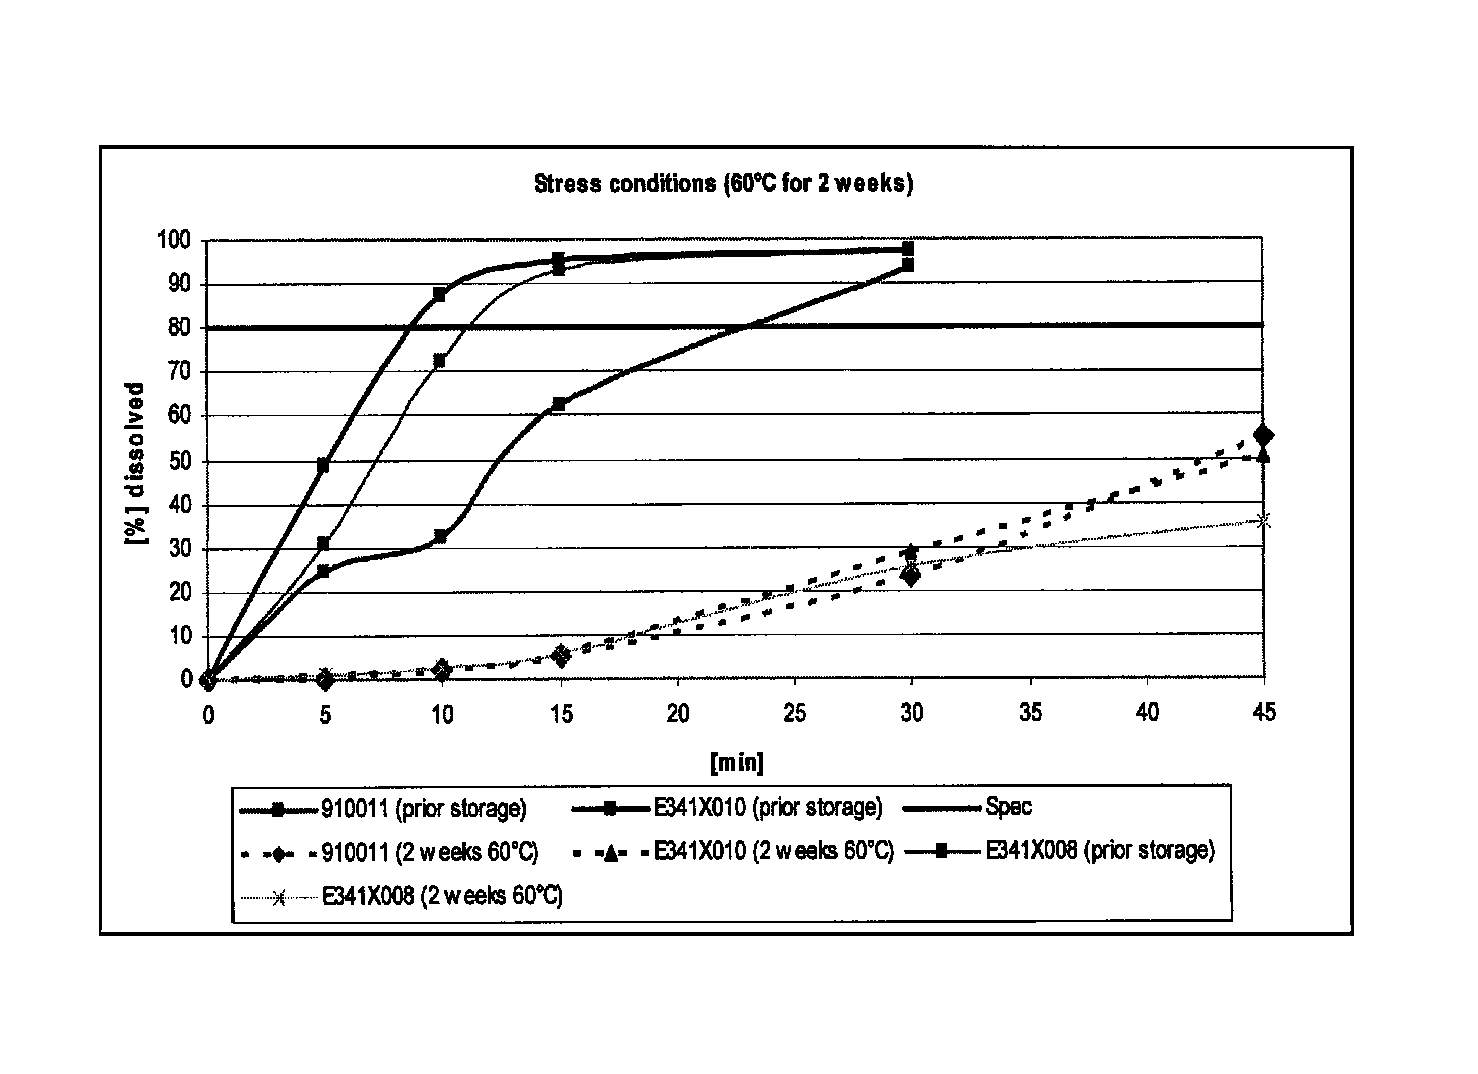 Capsule and powder formulations containing lanthanum compounds